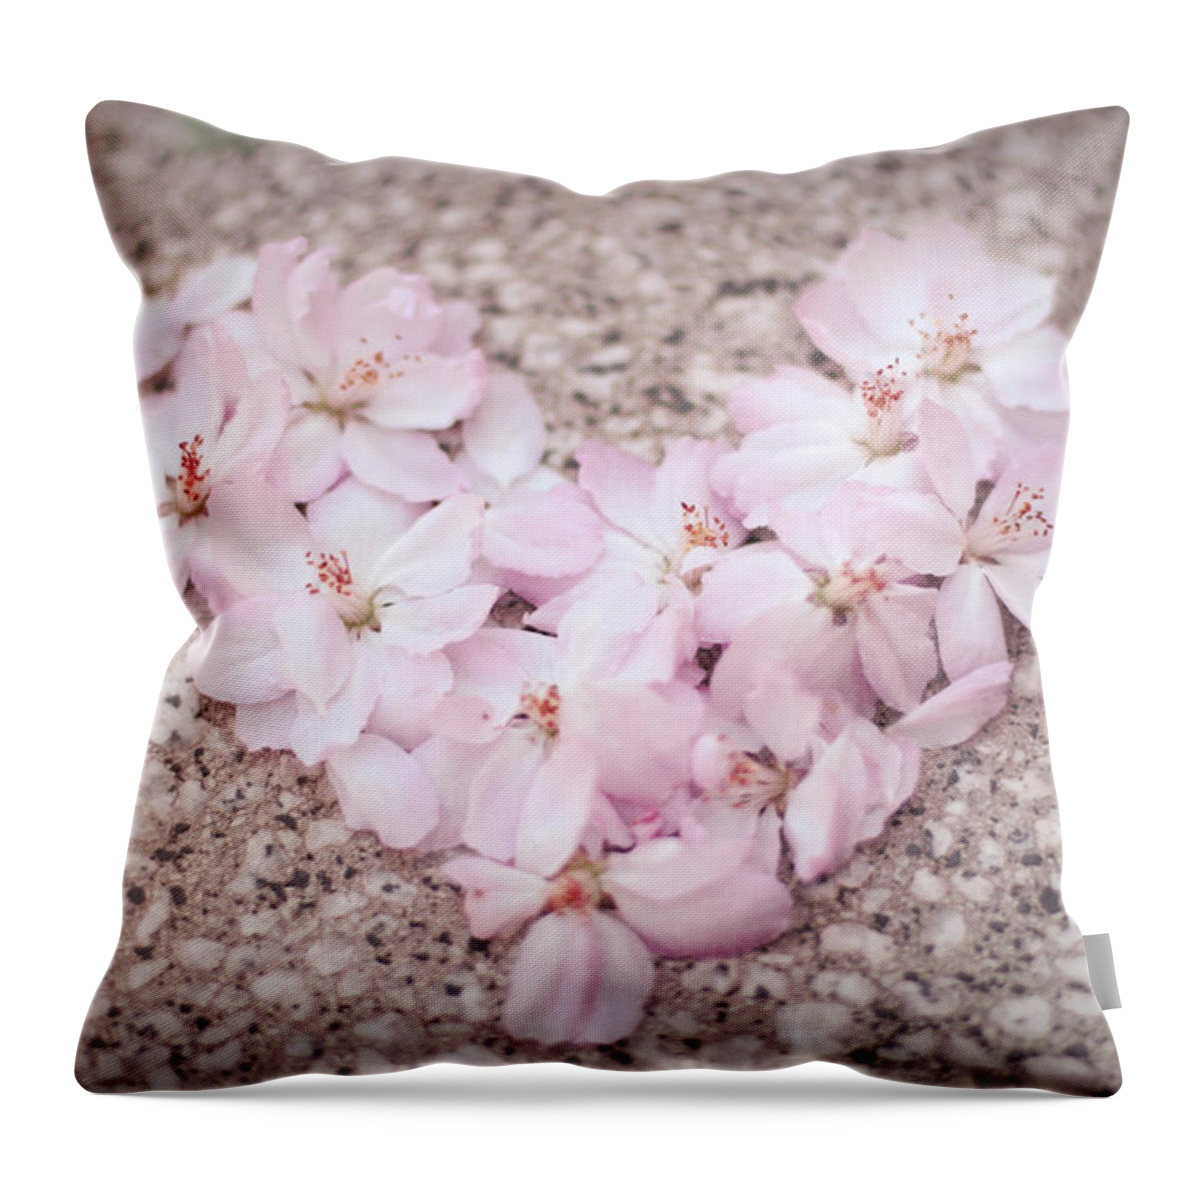 Yokohama Throw Pillow featuring the photograph Heart Shaped Made Petals Of Cherry by Mamigibbs